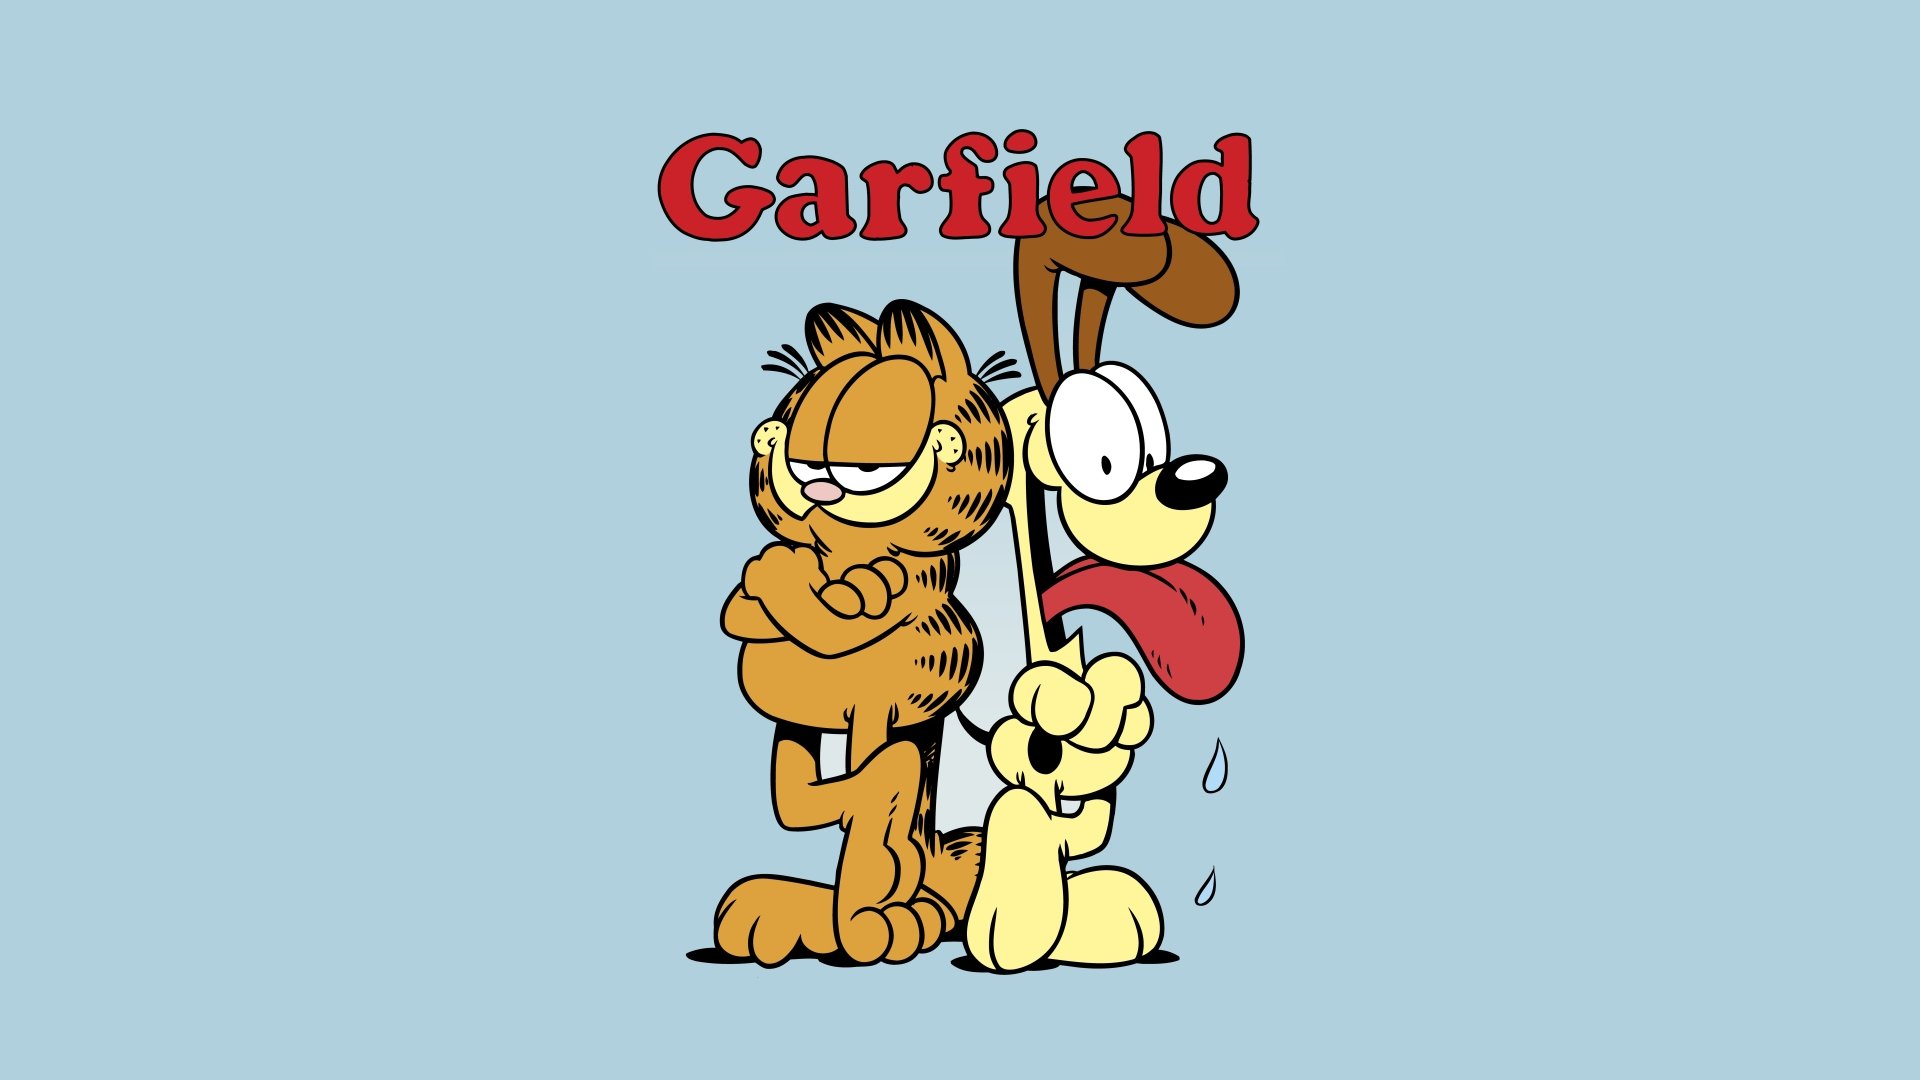 No More Mondays: The Story Behind The Last Garfield Comic